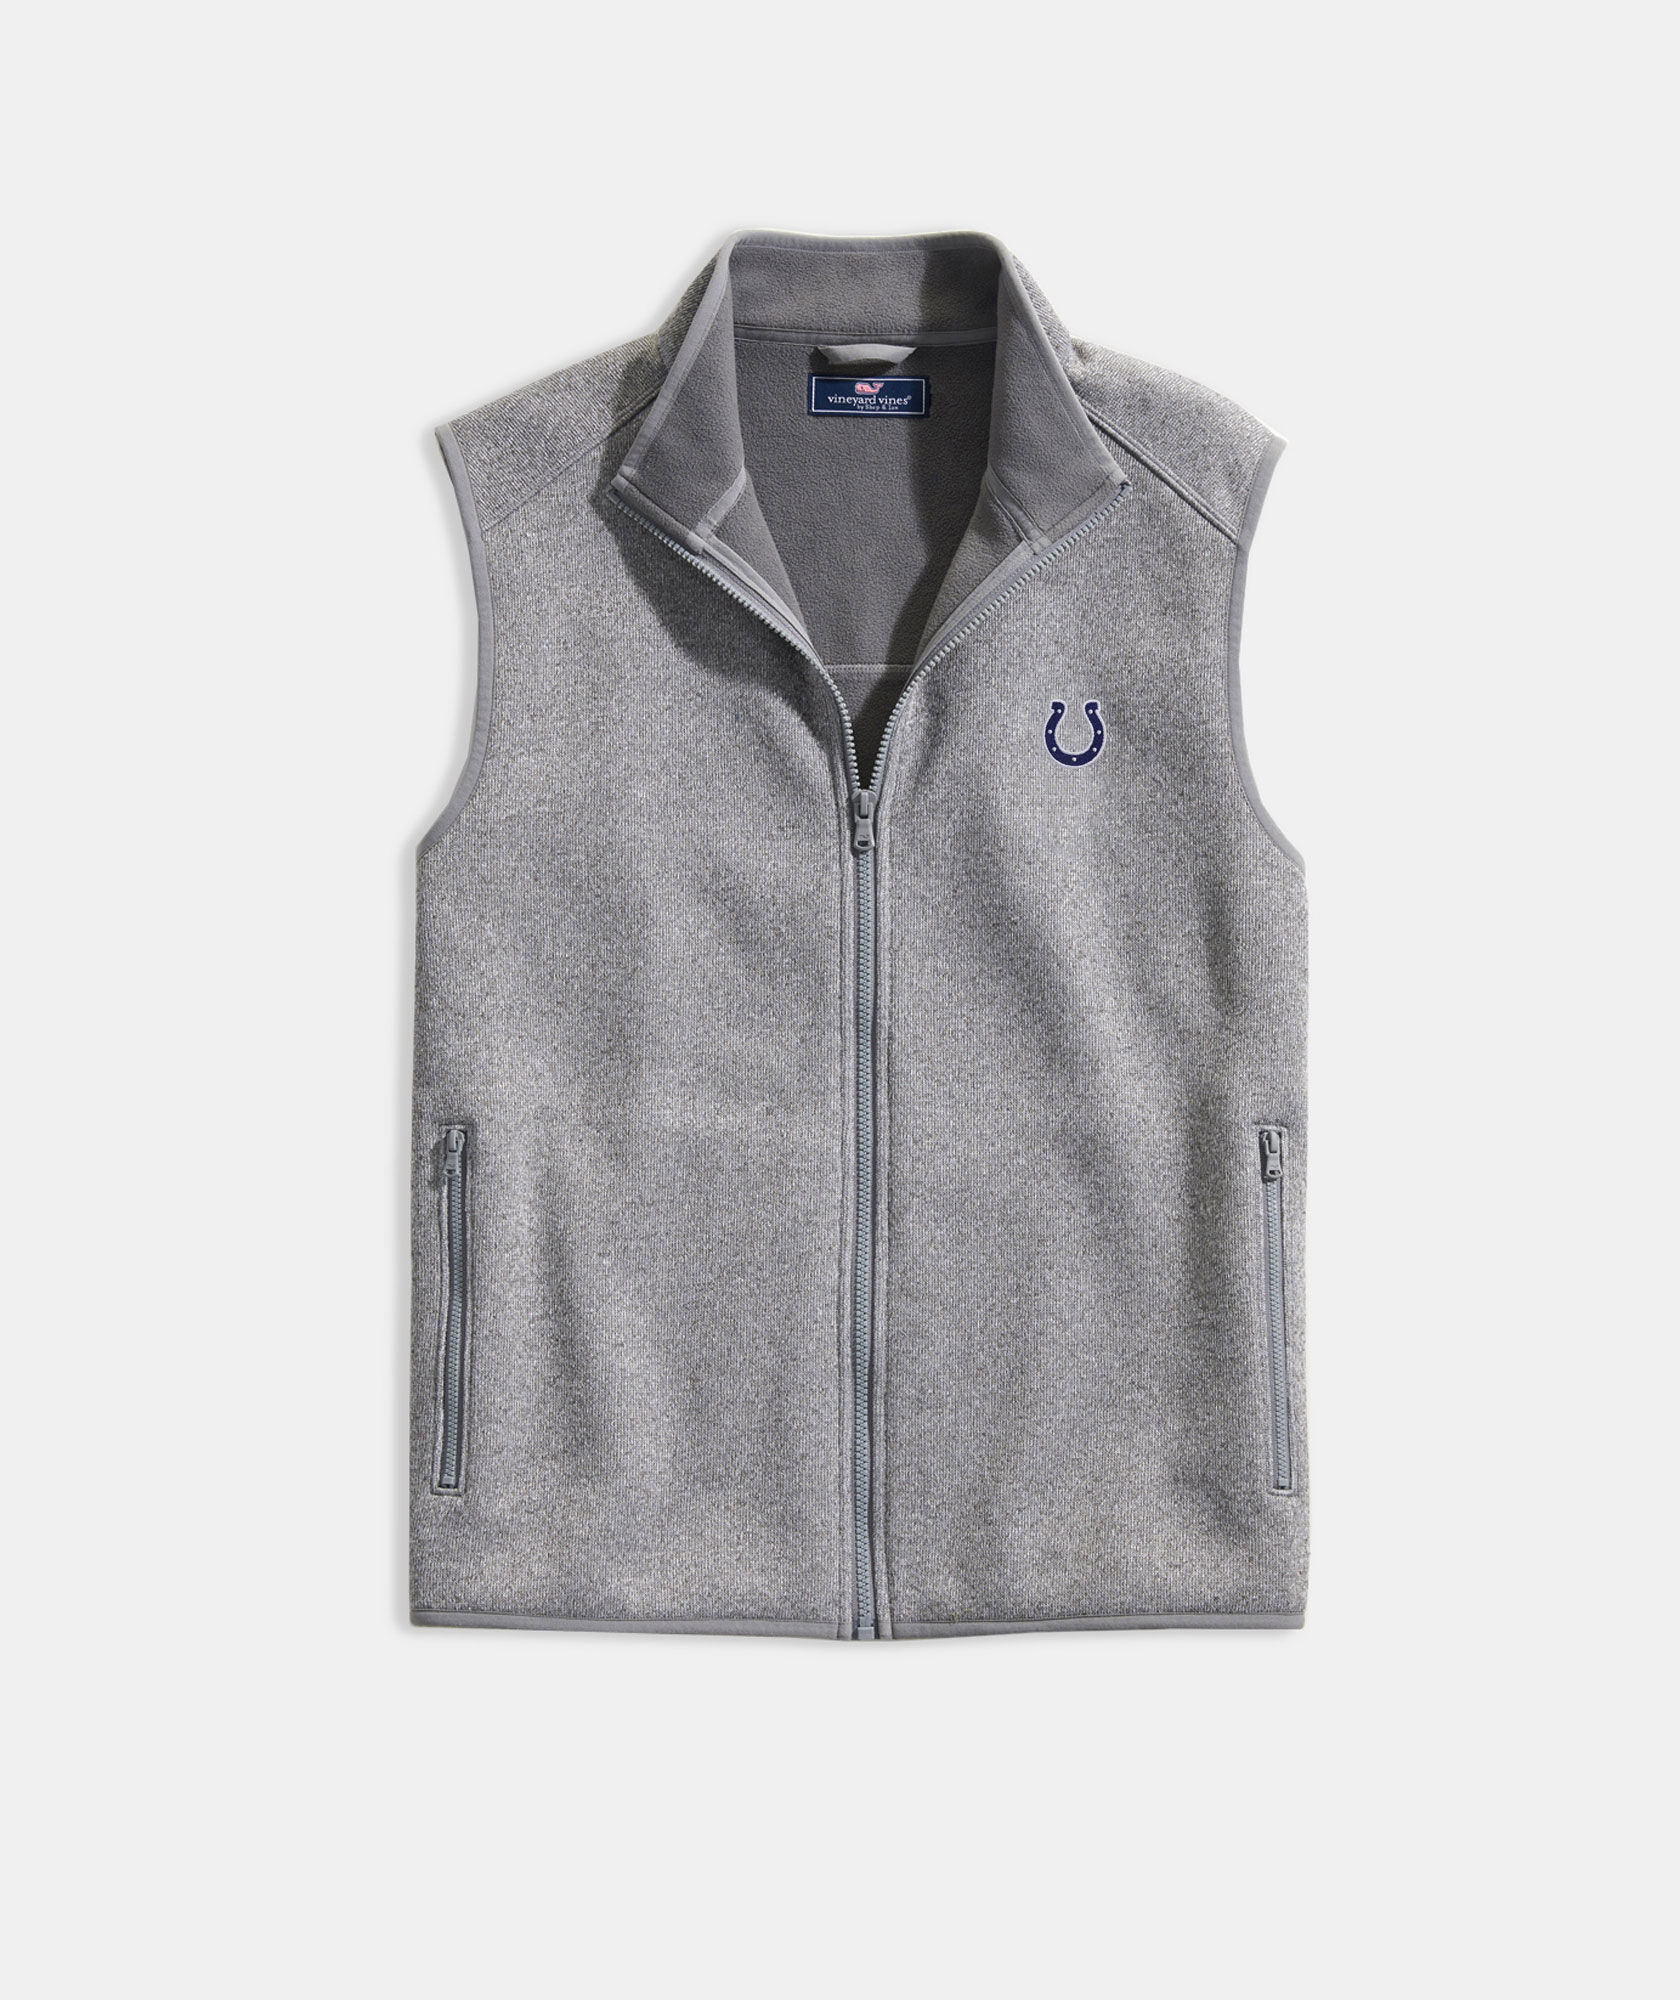 Indianapolis Colts Mountain Sweater Fleece Vest